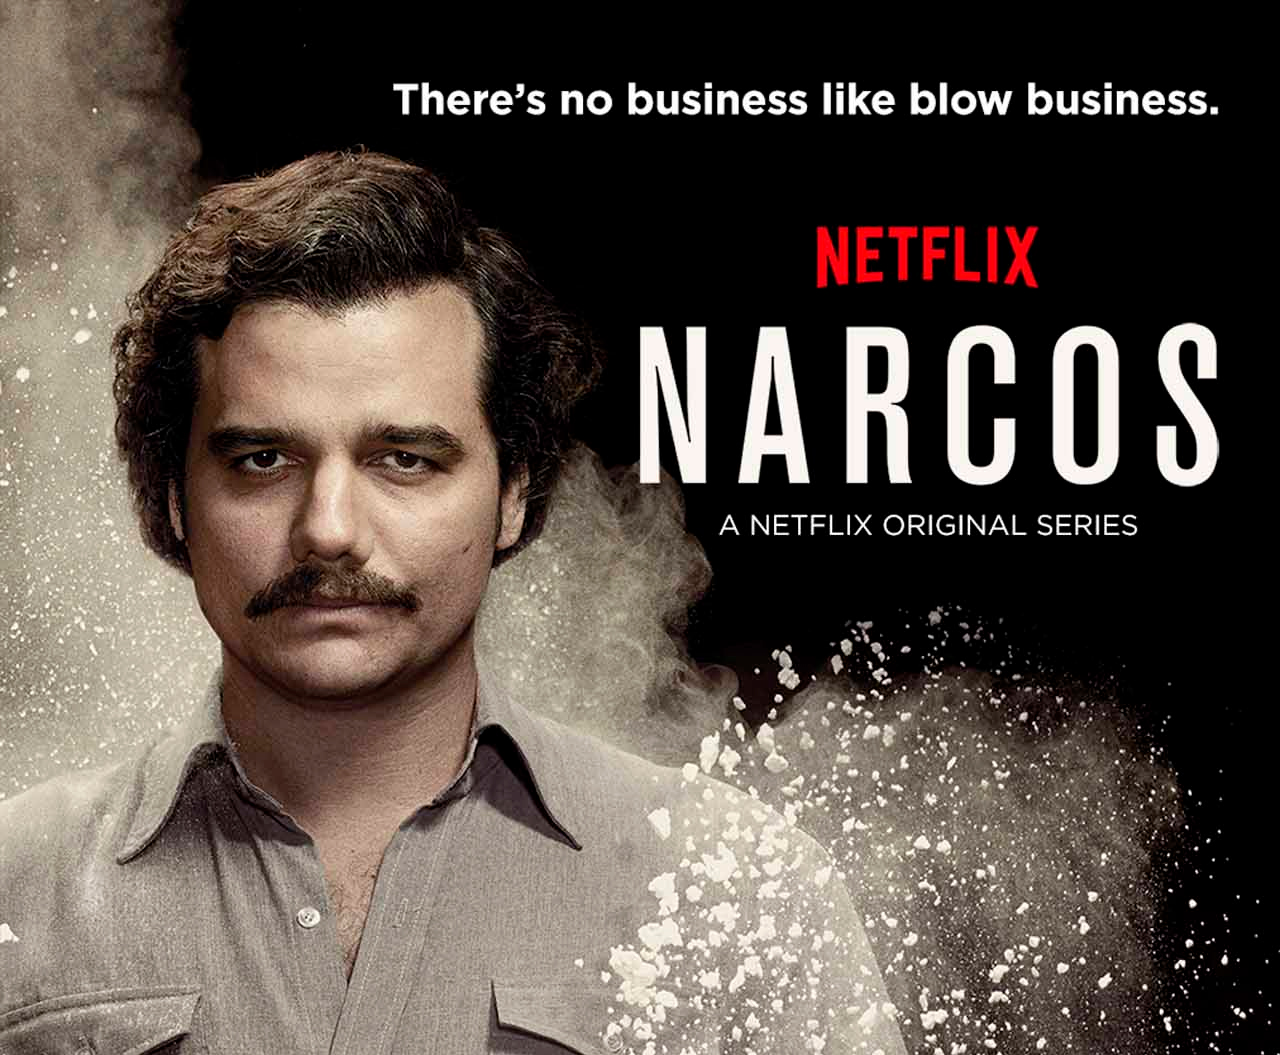 Narcos lives up to its tremendous hype